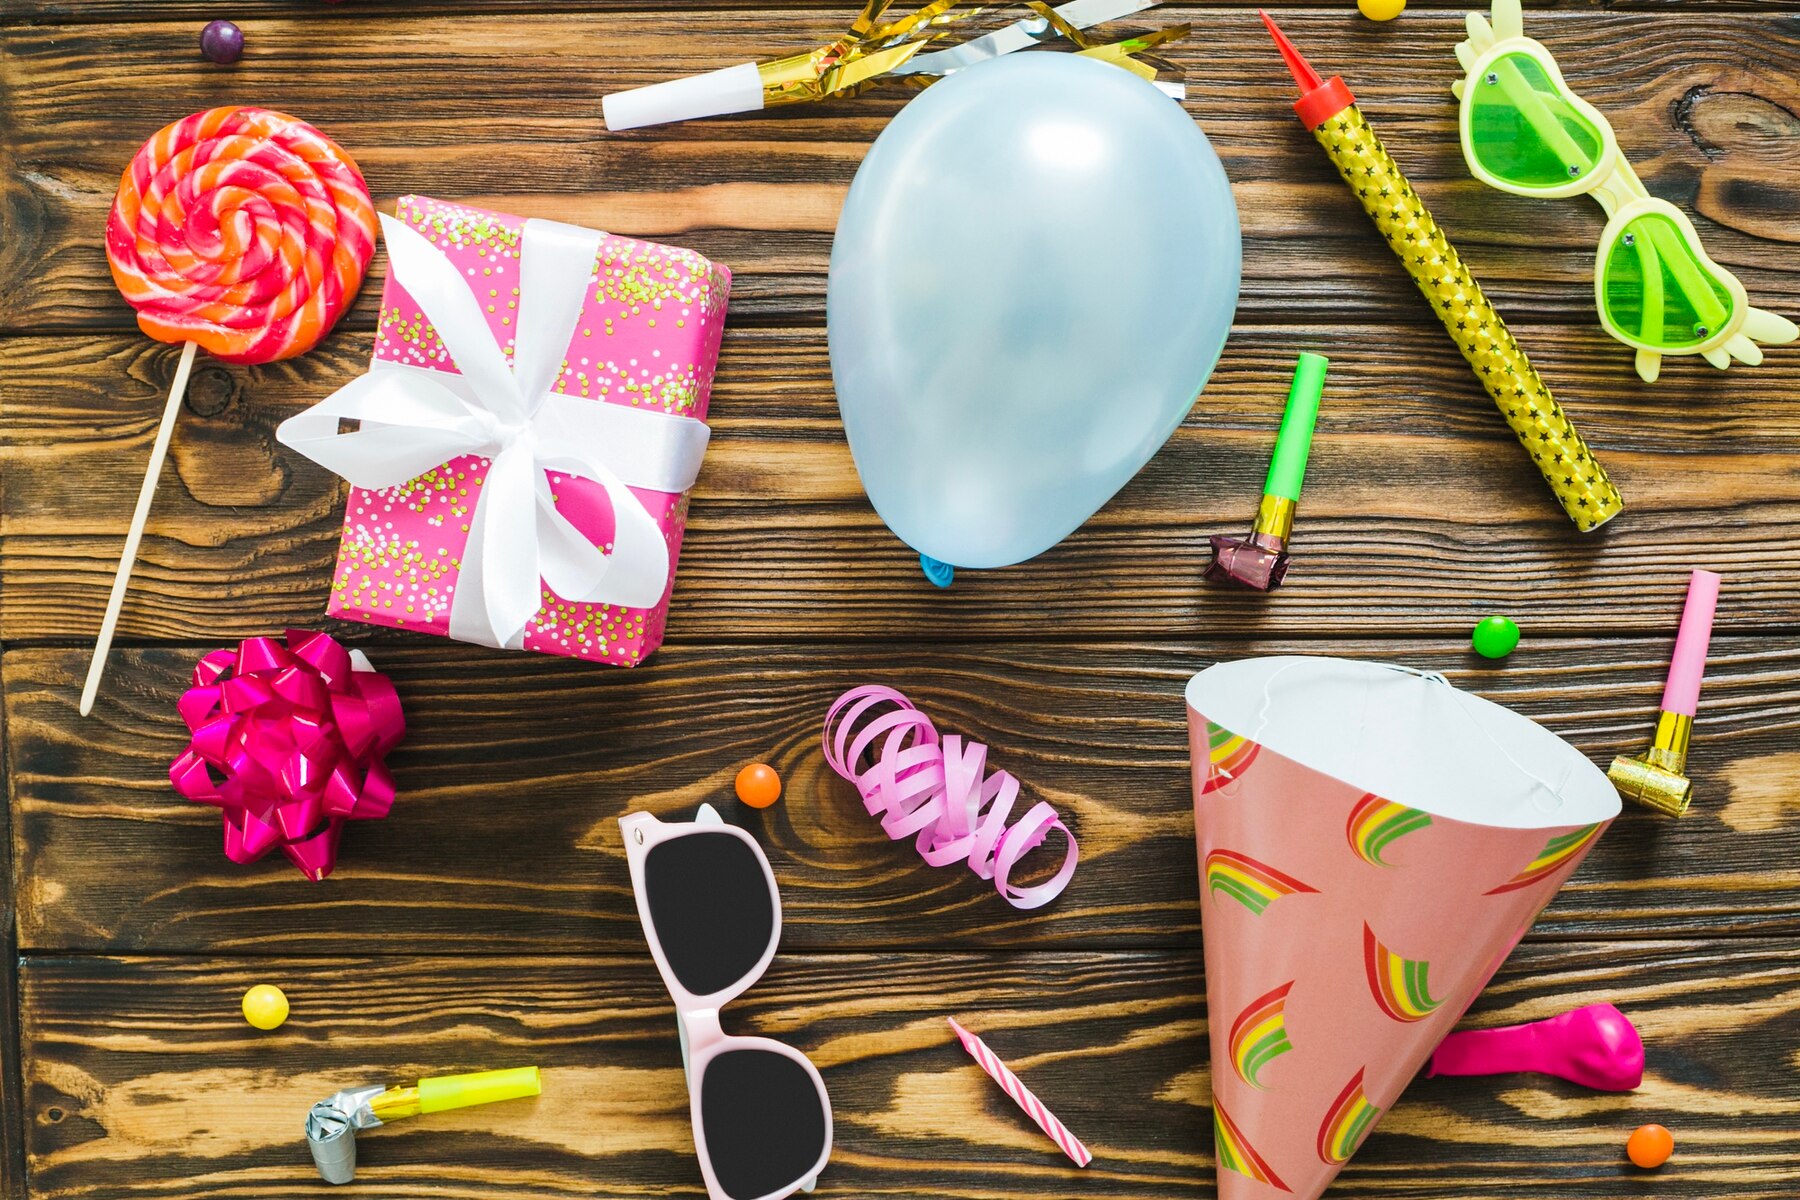 How To Choose An Ideal Souvenir For A Birthday Party?